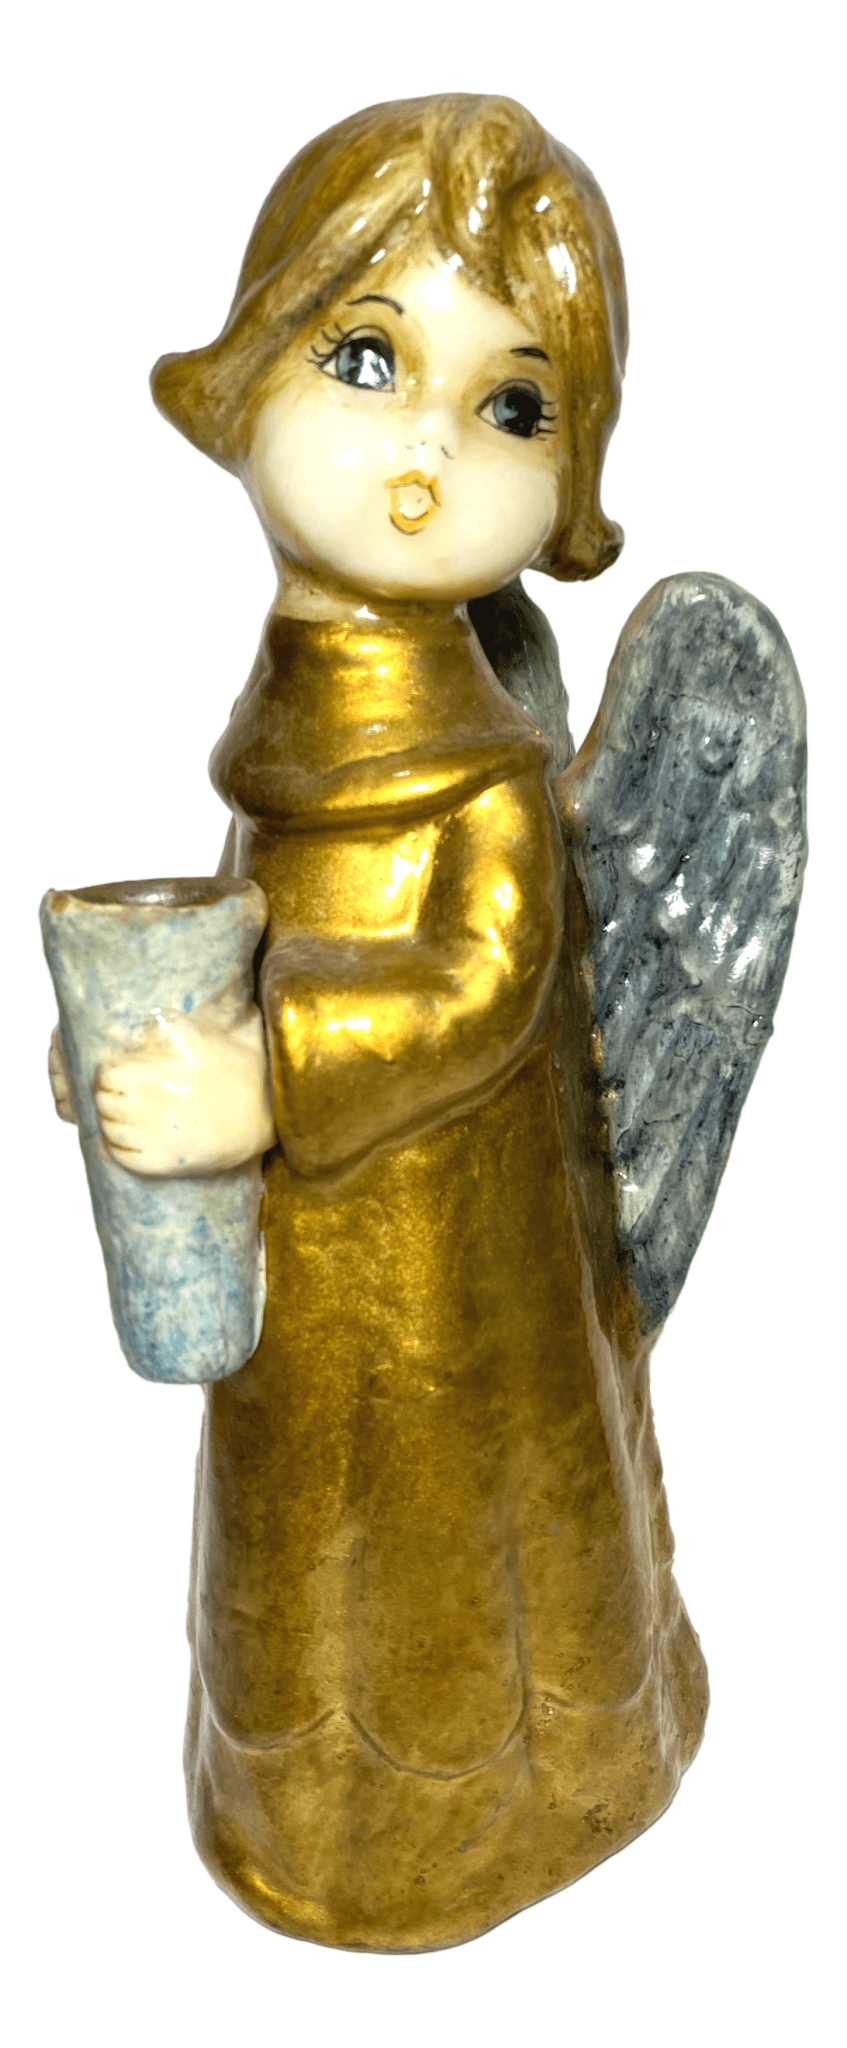 Statue 1960s Candleholder Angel Figurine Paper Mache Wax Handcrafted By Mexican Artisan Matamoros Tamaulipas 3 1/4 L x 5 W x 11 H Inches - Ysleta Mission Gift Shop- VOTED El Paso's Best Gift Shop